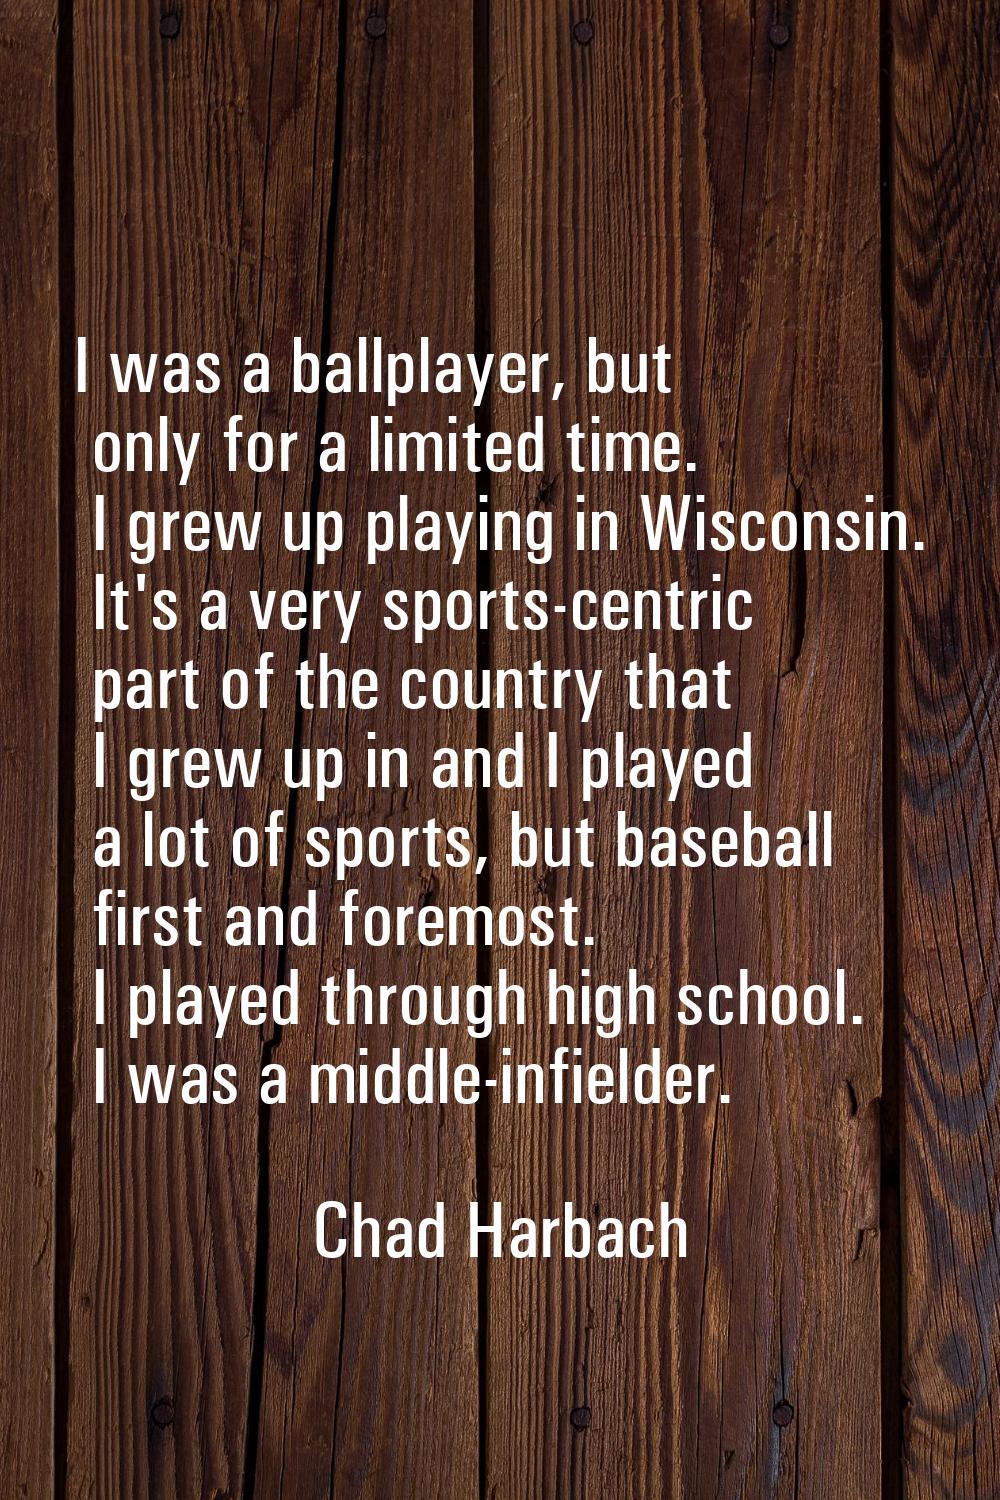 I was a ballplayer, but only for a limited time. I grew up playing in Wisconsin. It's a very sports